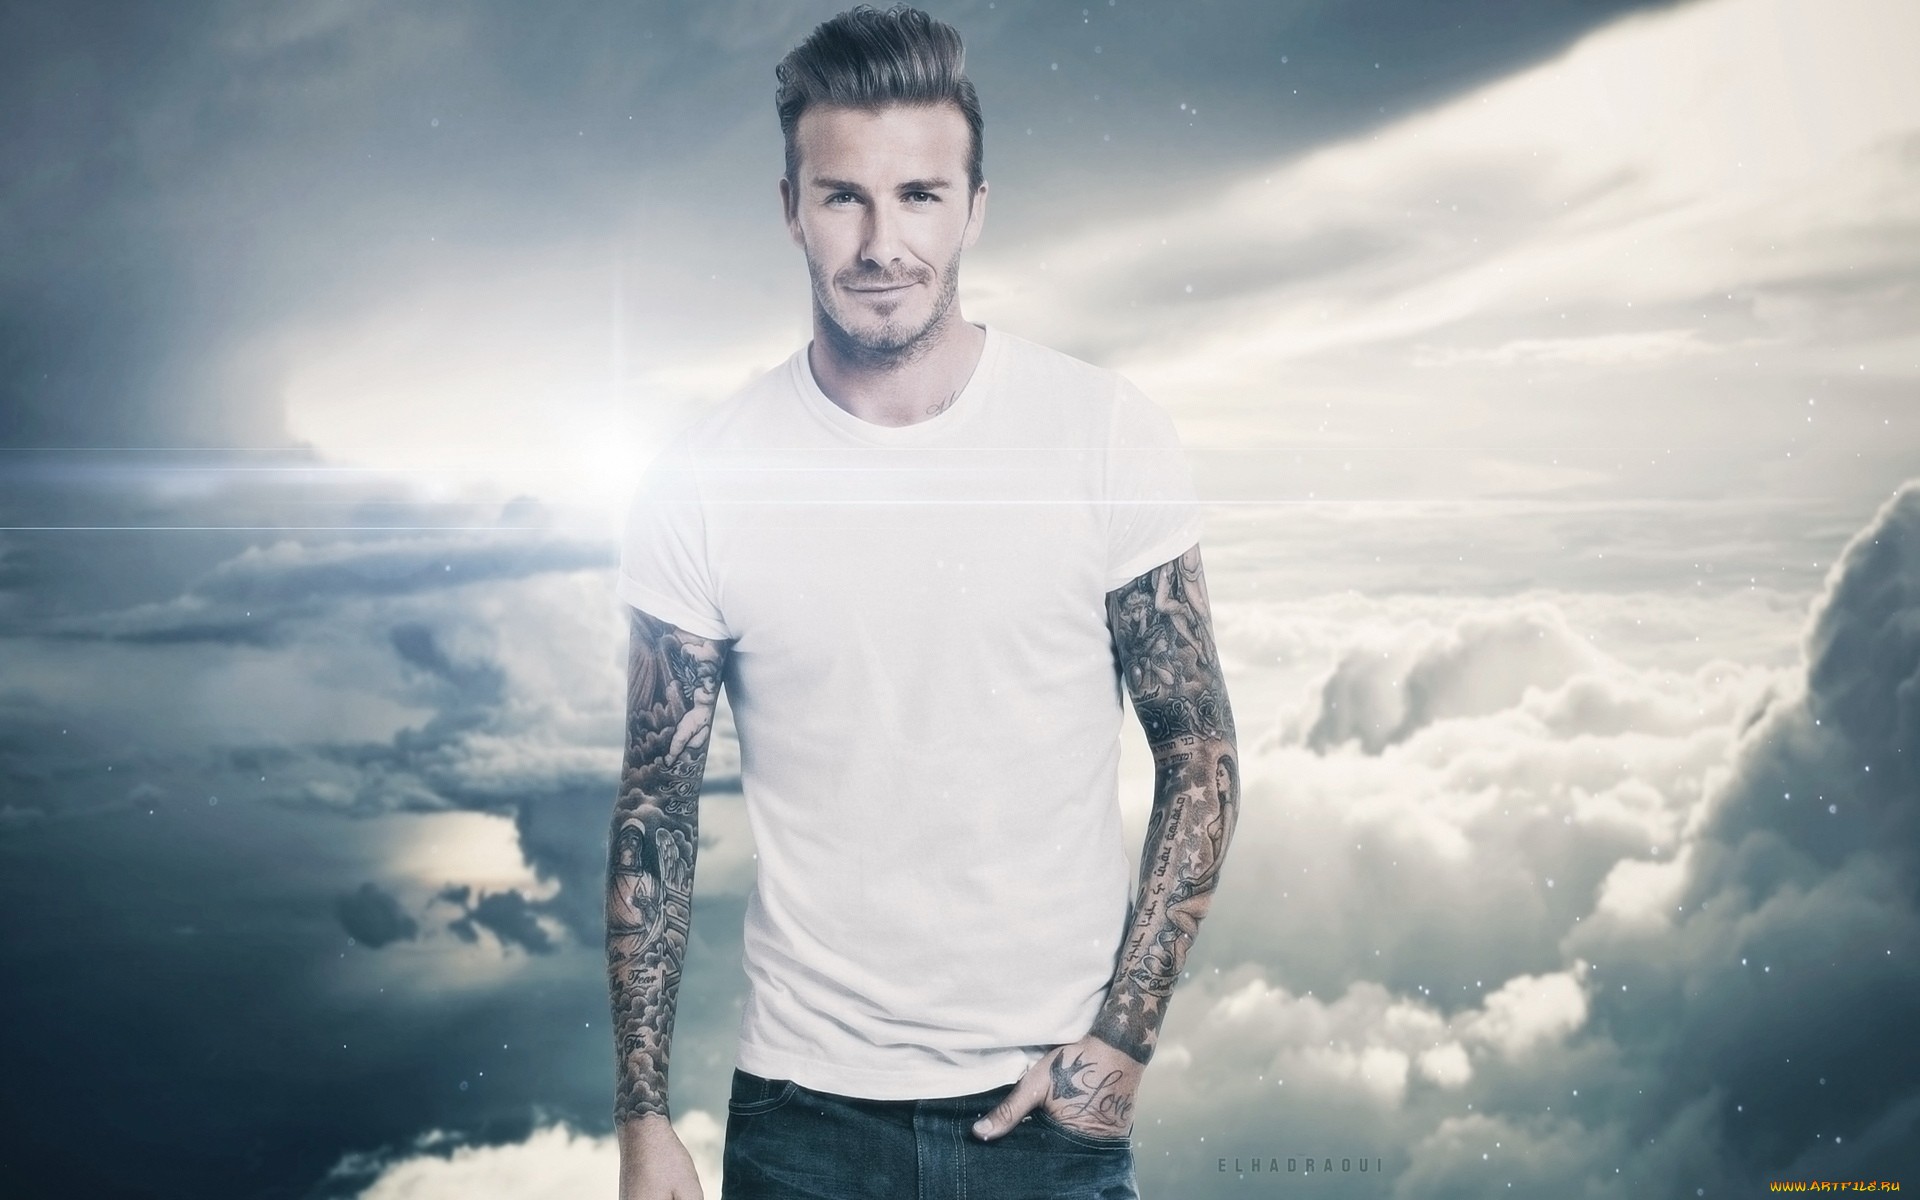  download Download David Beckham Wallpapers To Your Cell Phone 1920x1200